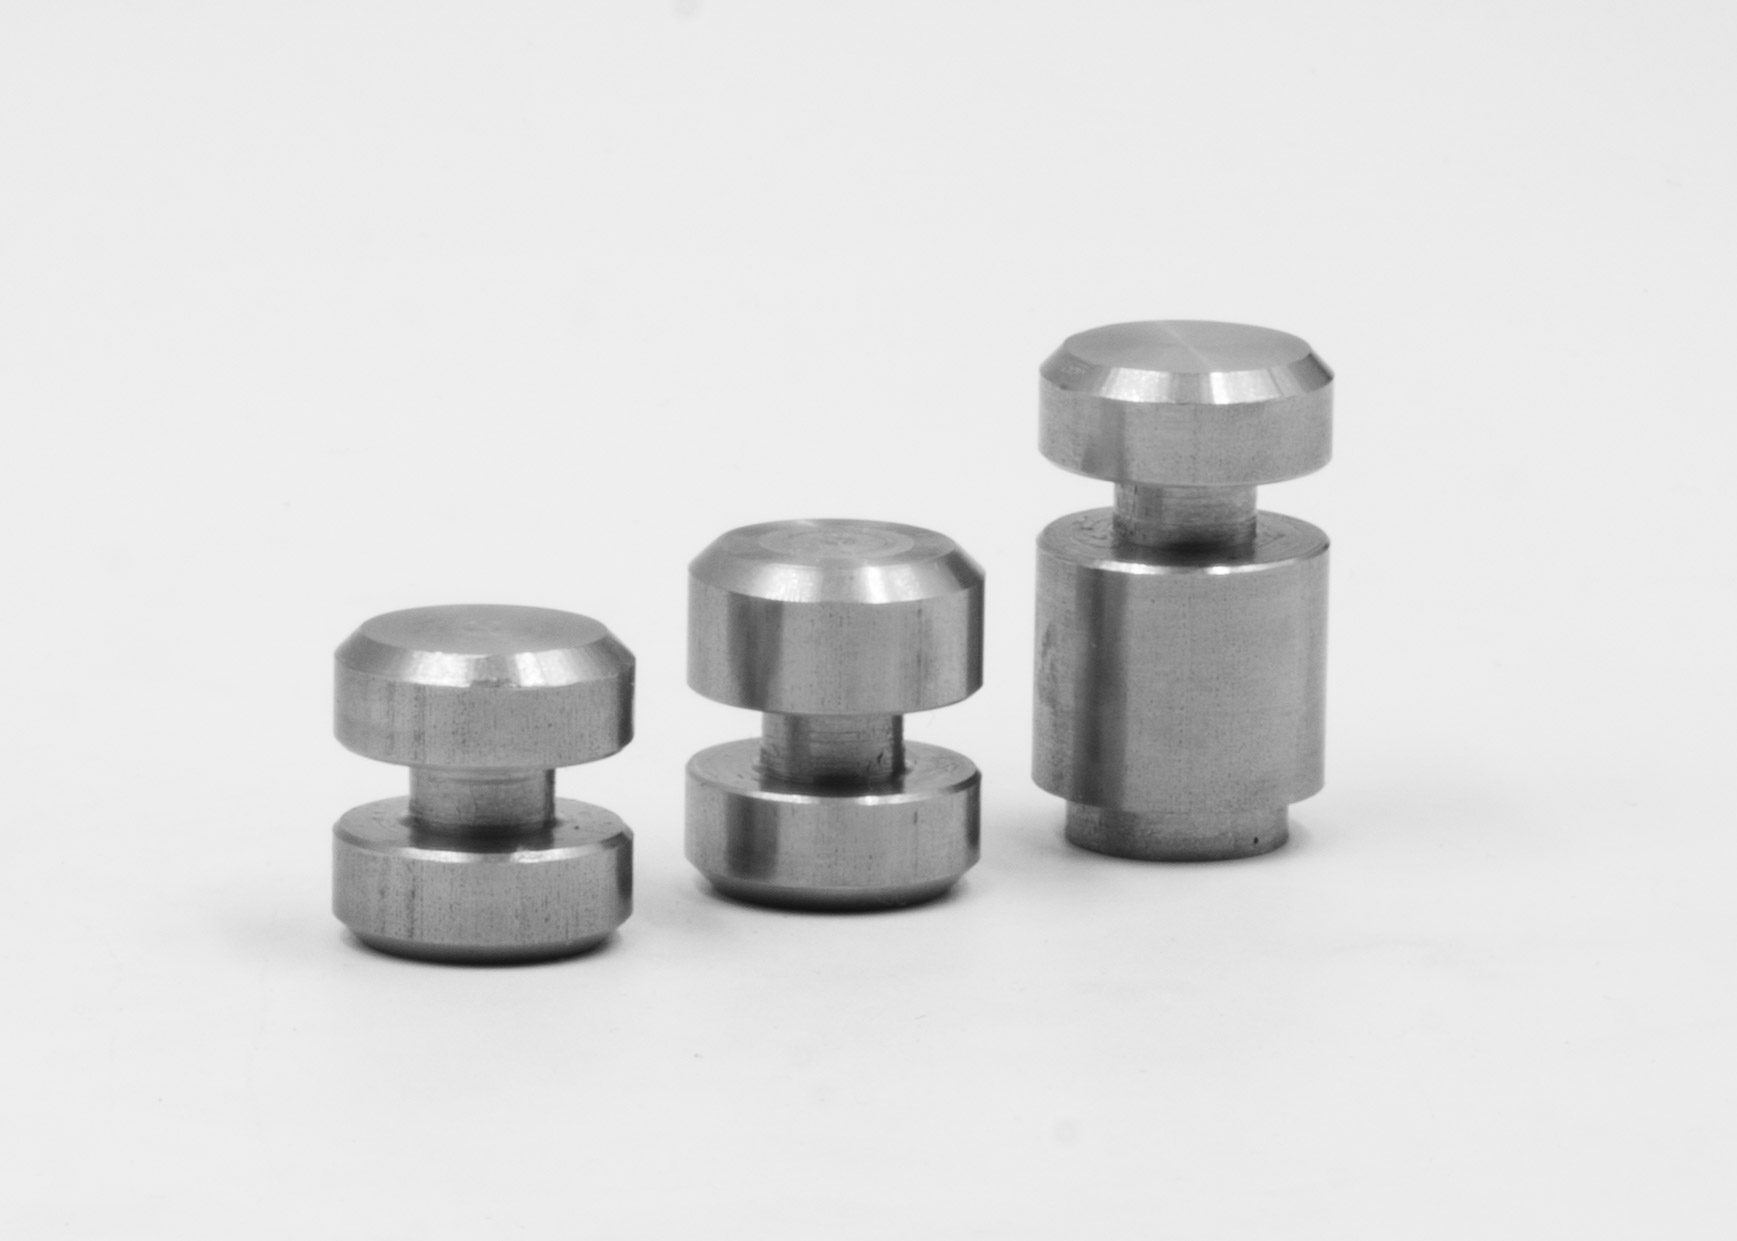 Plunge Cut and Chamfered Stainless Steel Part